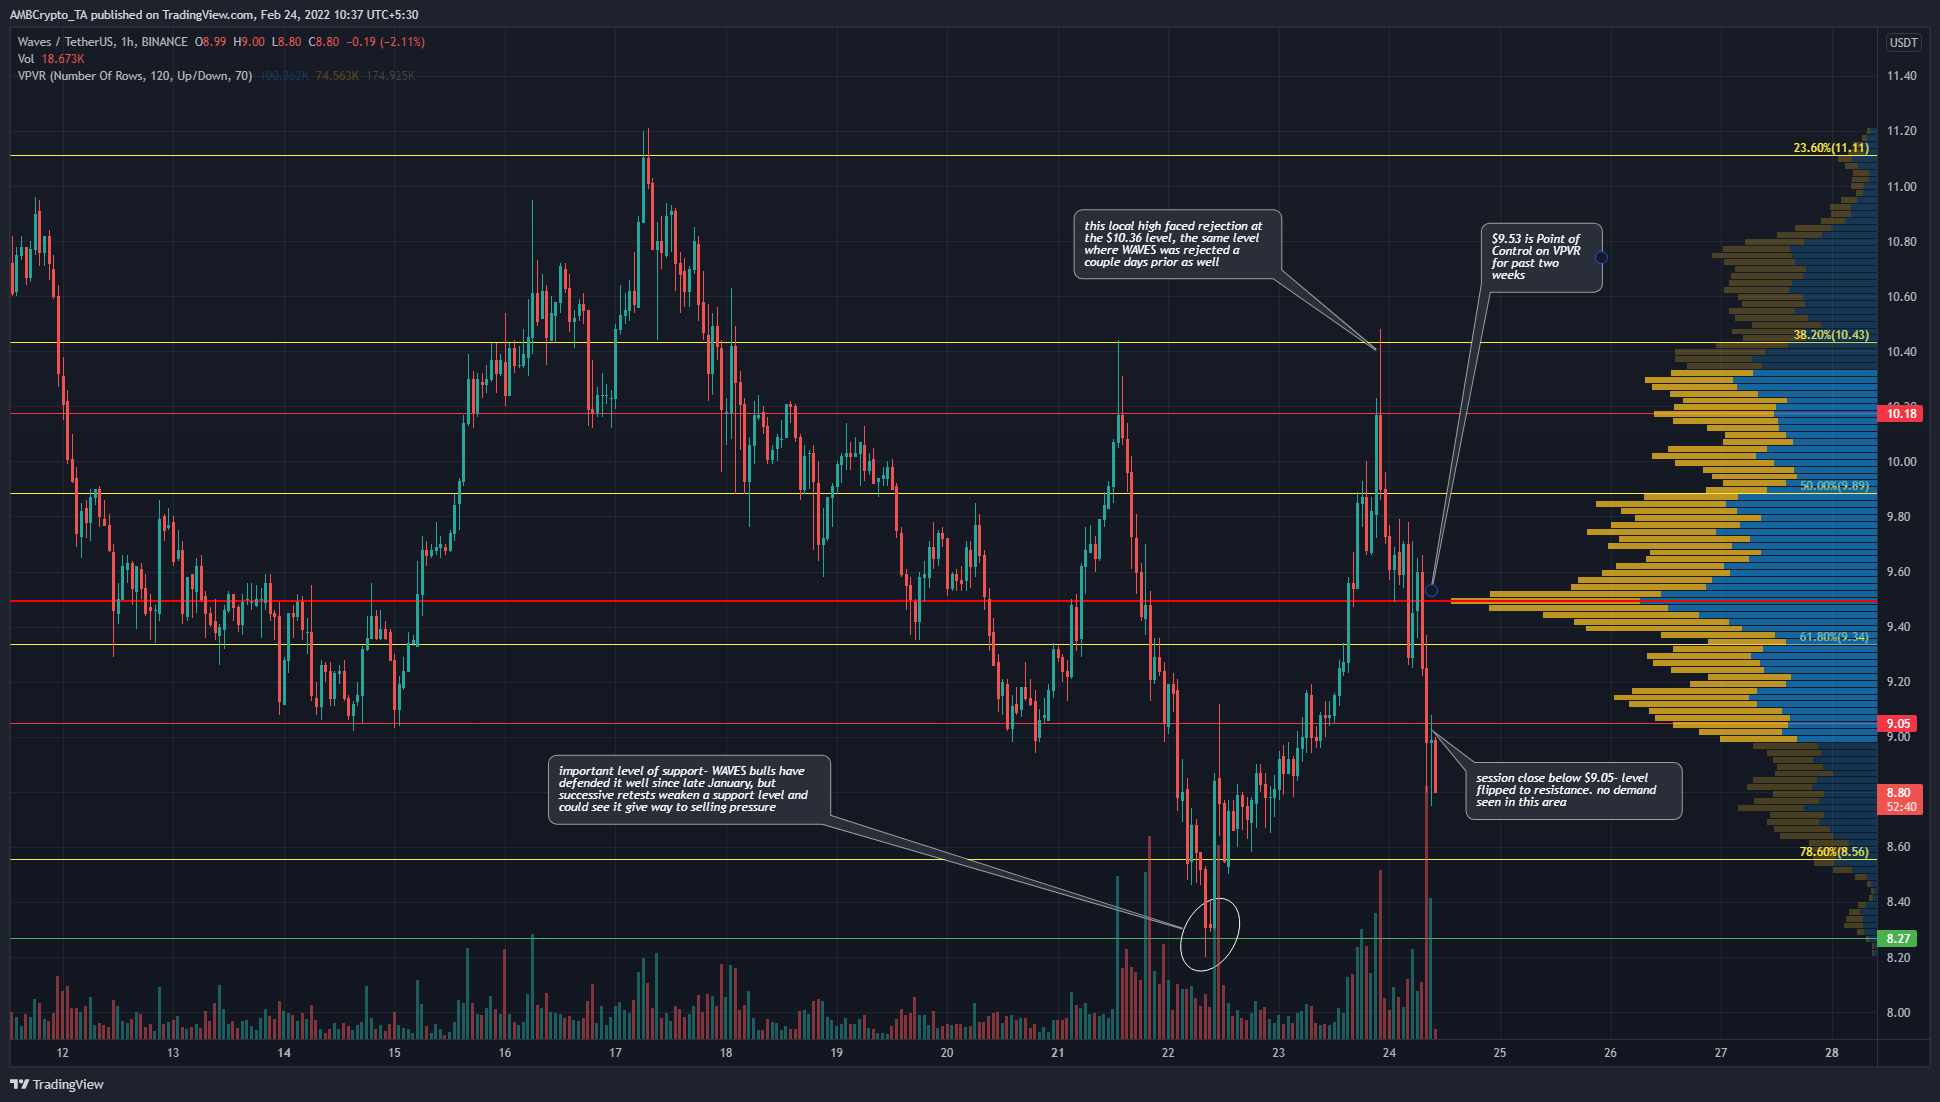 WAVES went tumbling below yet another support level as fear intensified